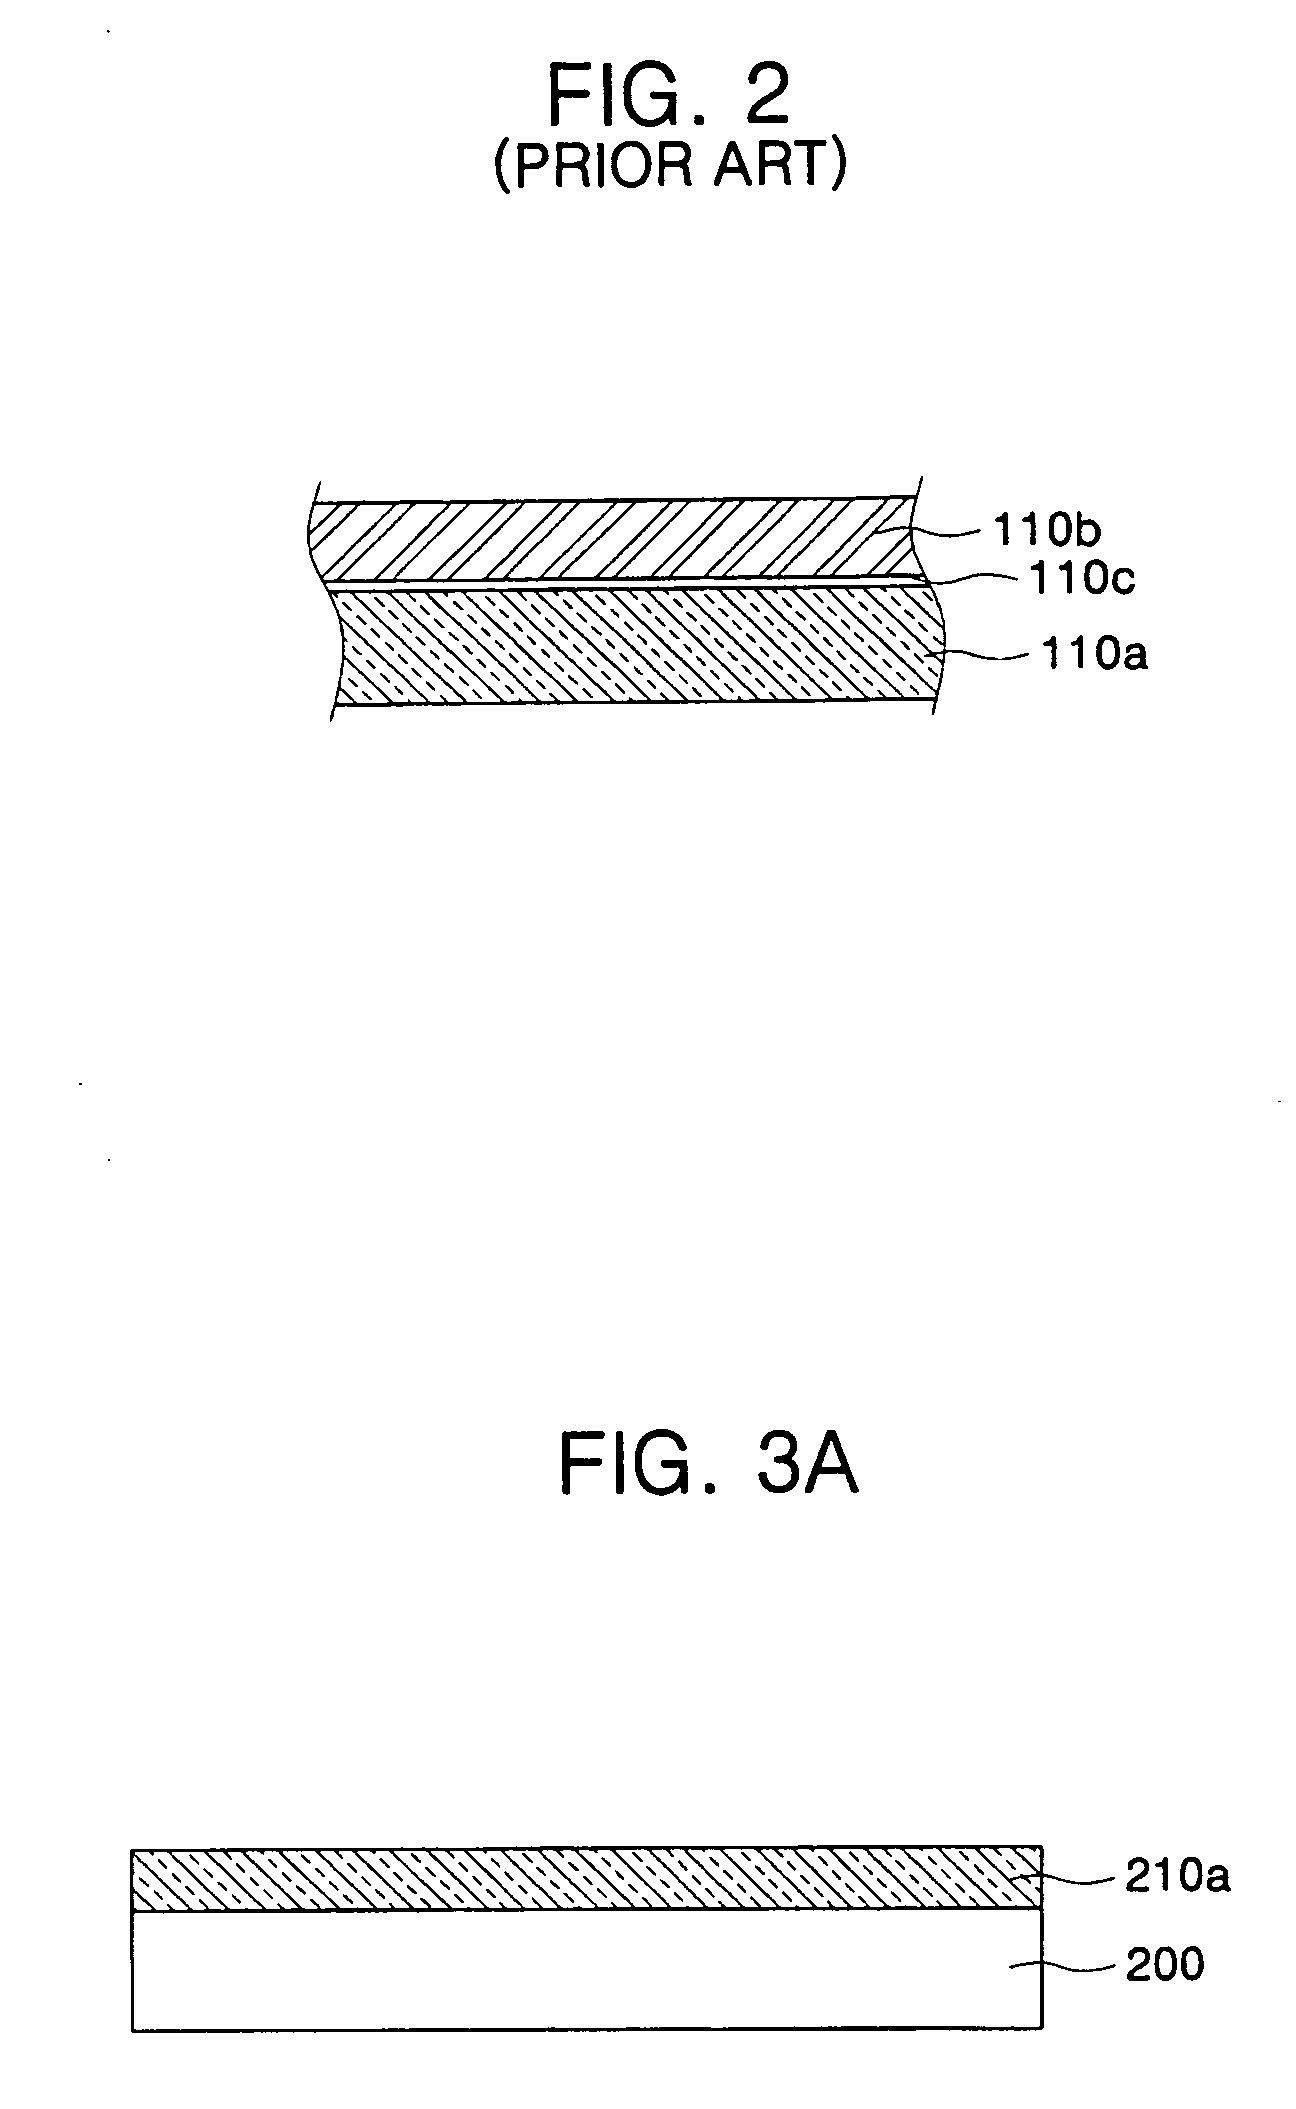 Top-emission organic electroluminescent display and method of fabricating the same